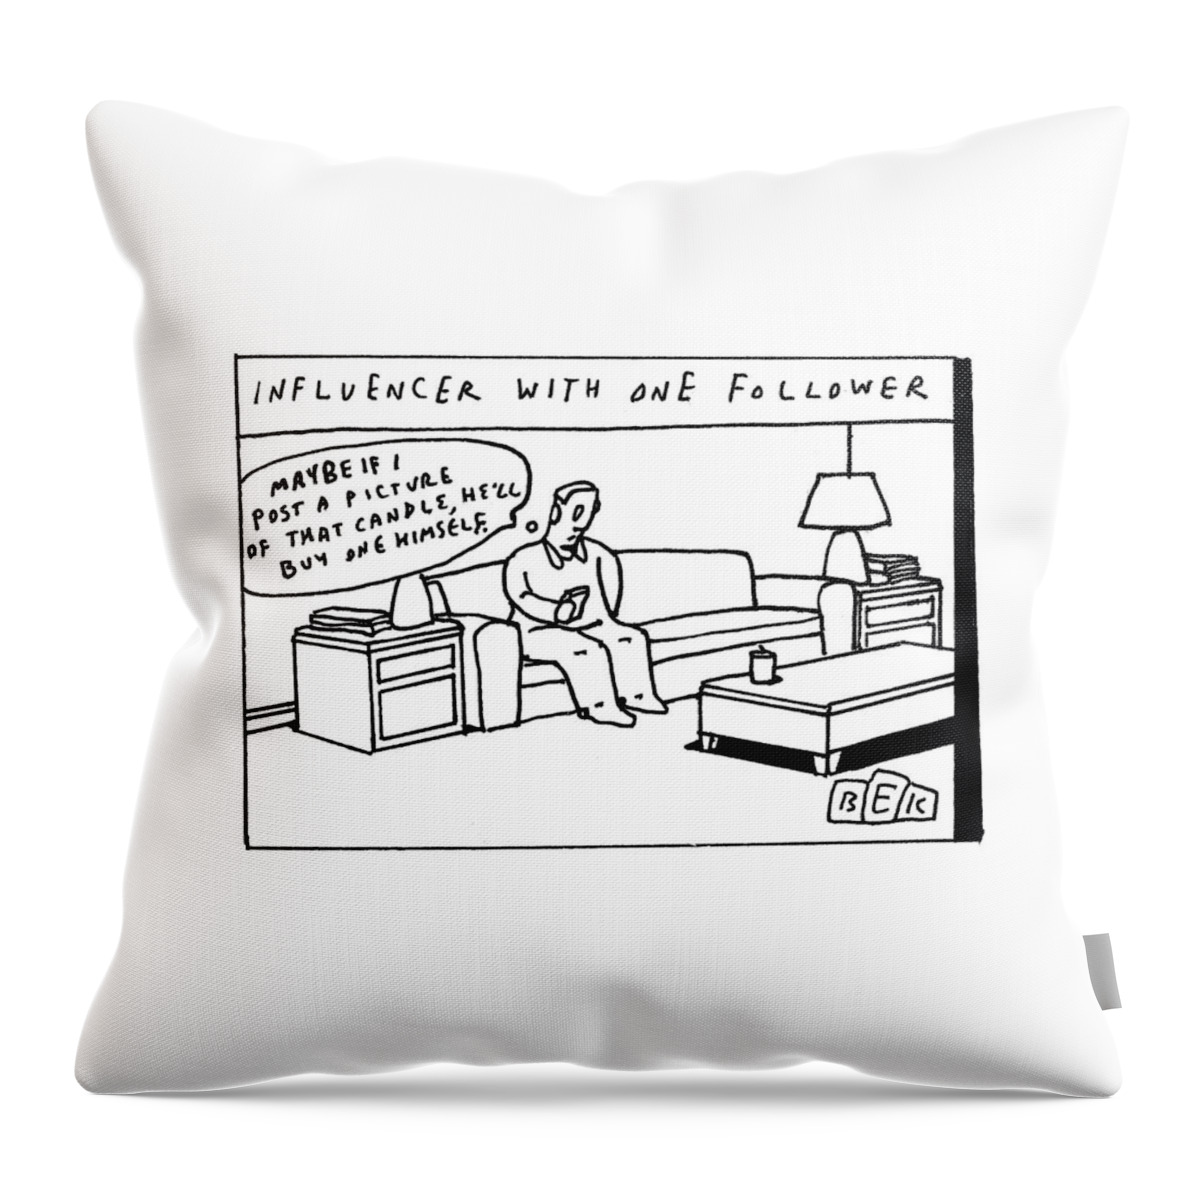 Influencer With One Follower Throw Pillow